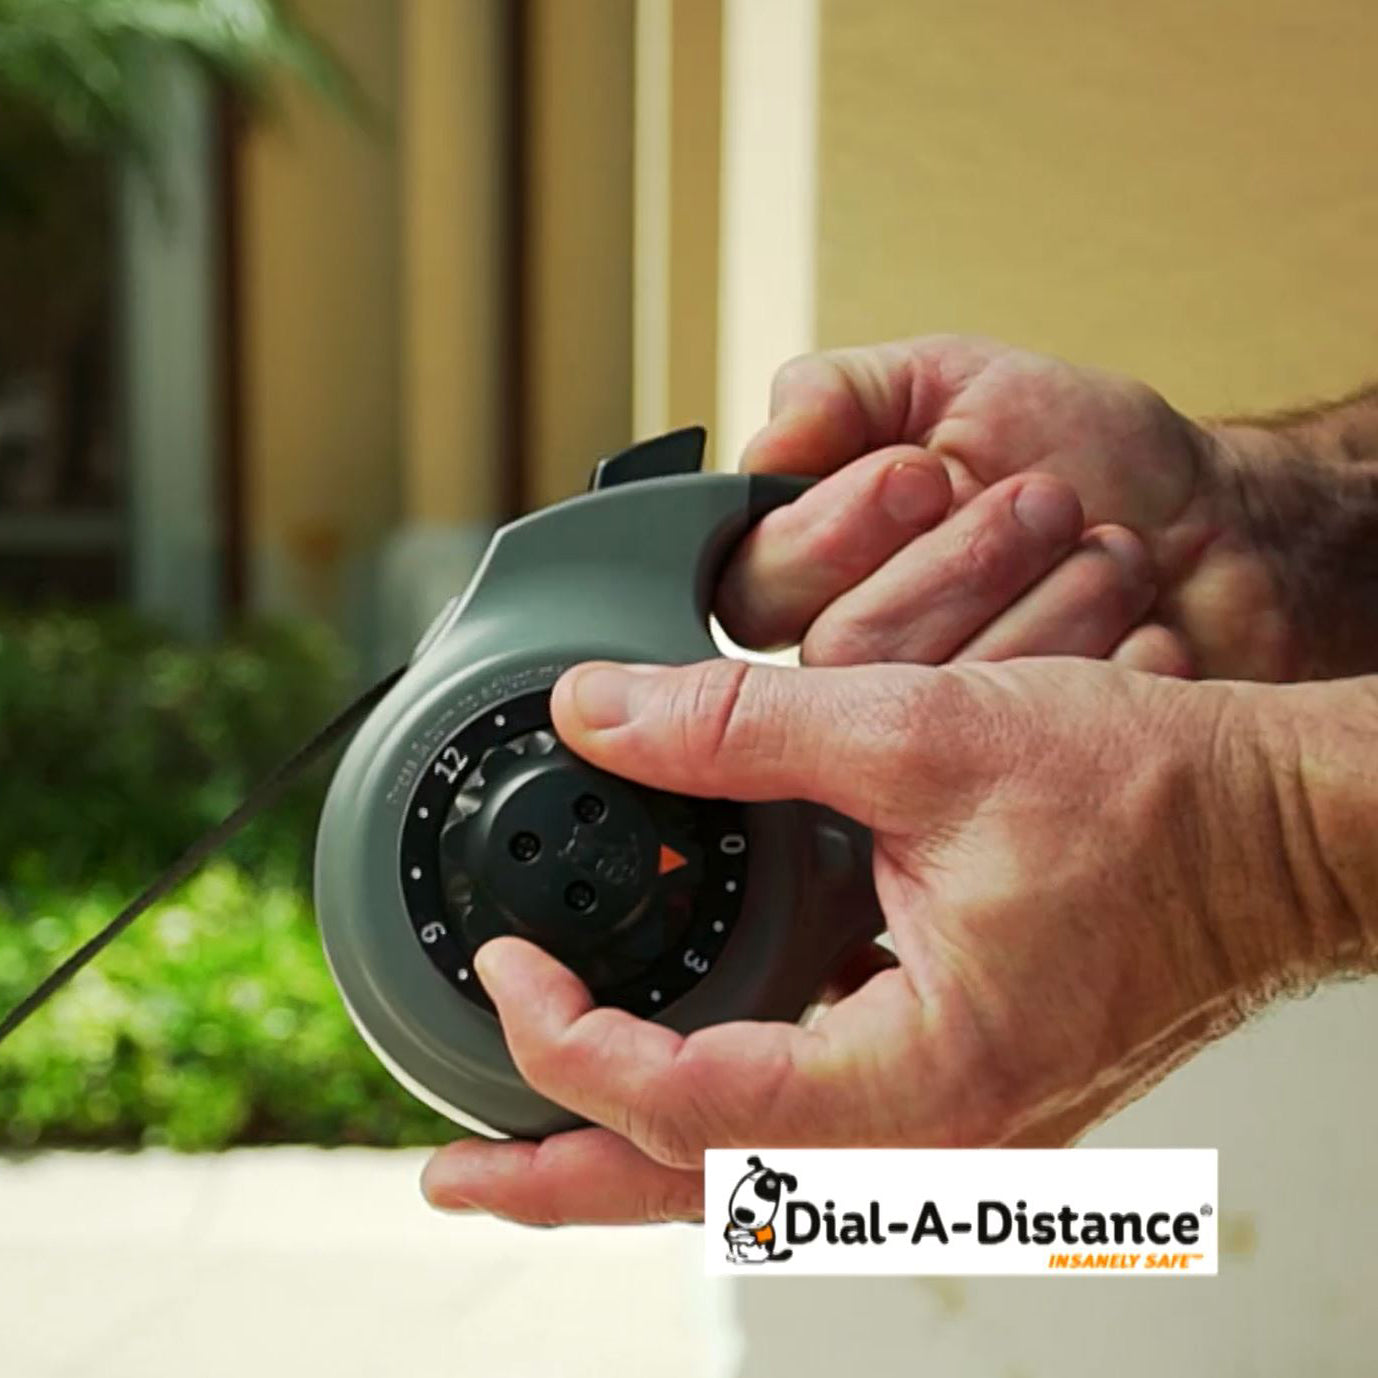 dial-a-distance retractable dog leash ability to change distance